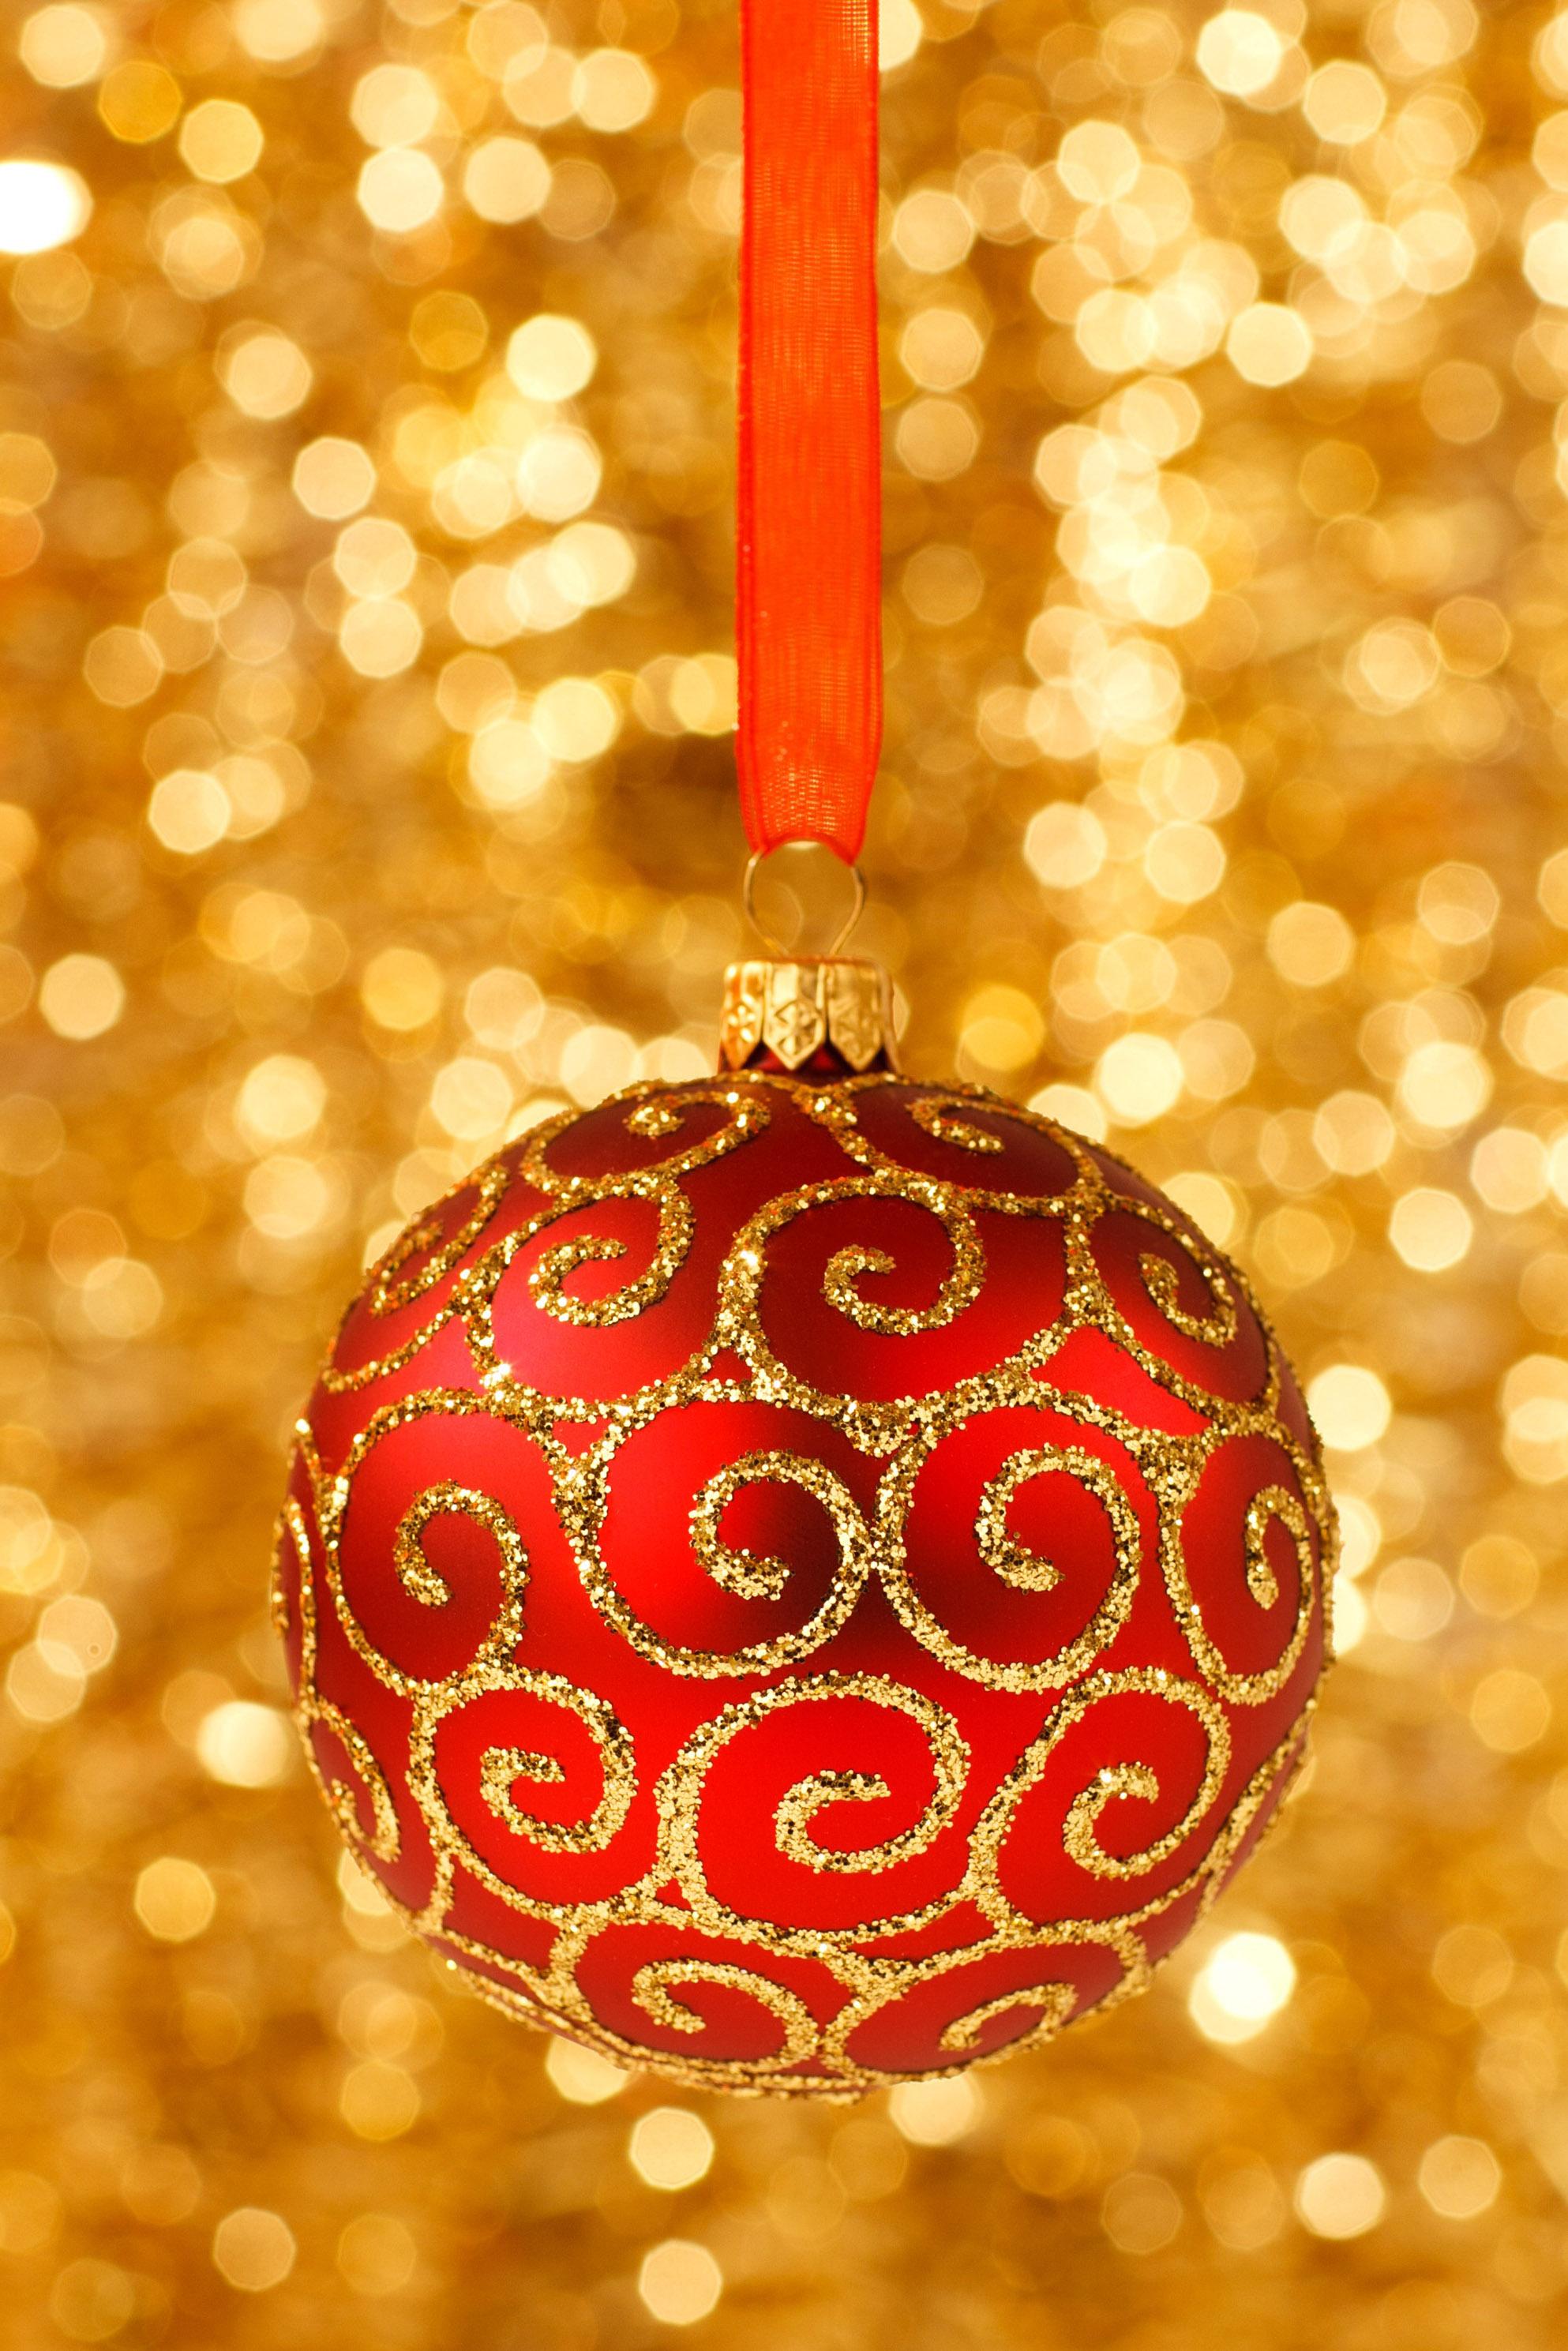 Great Ball or Bauble Themed Free Christmas Wallpaper or